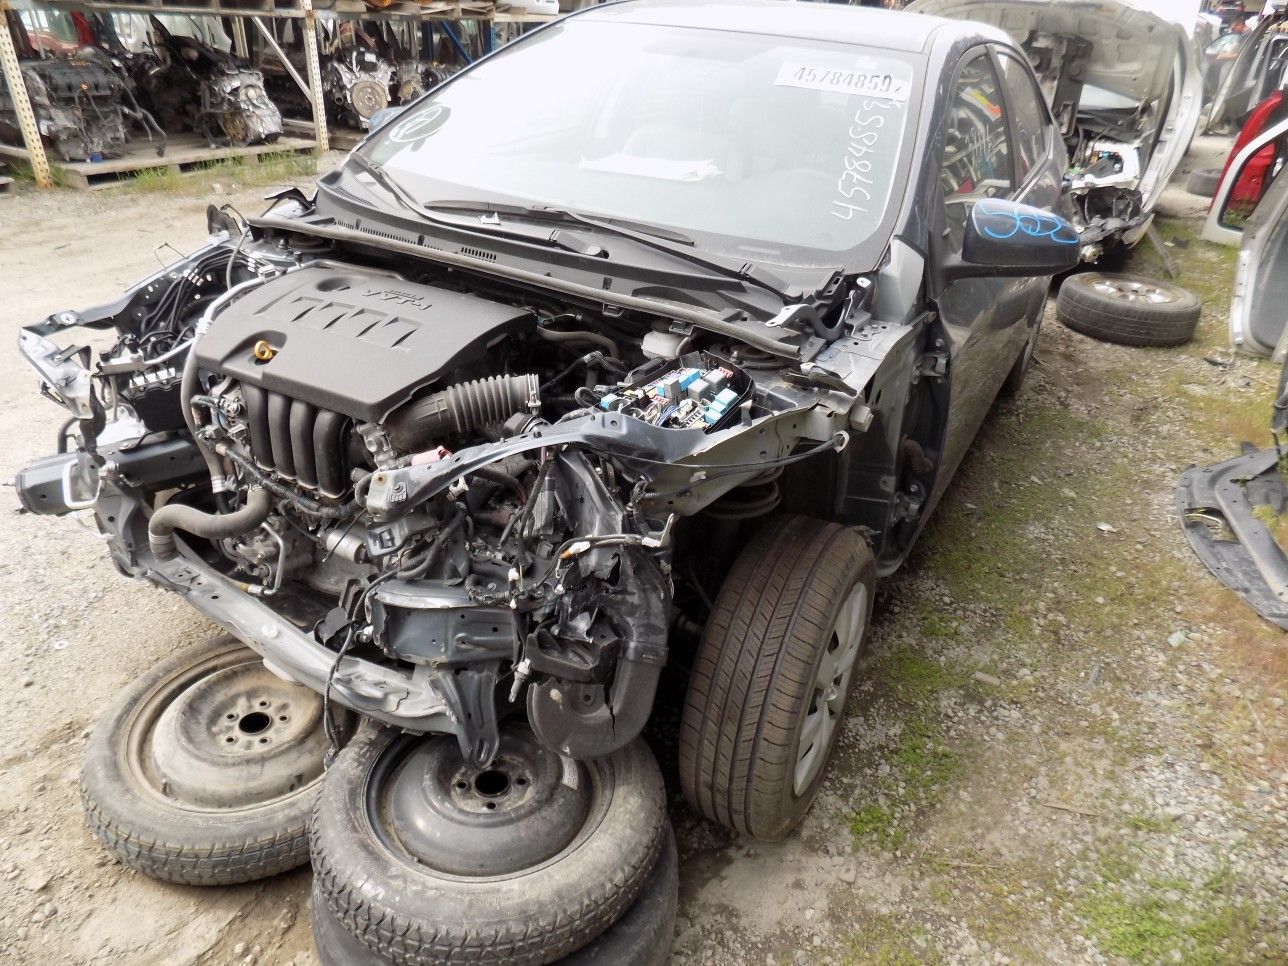 2016 Toyota Corolla 1.8 L (Parting Out) STOCK # 5655